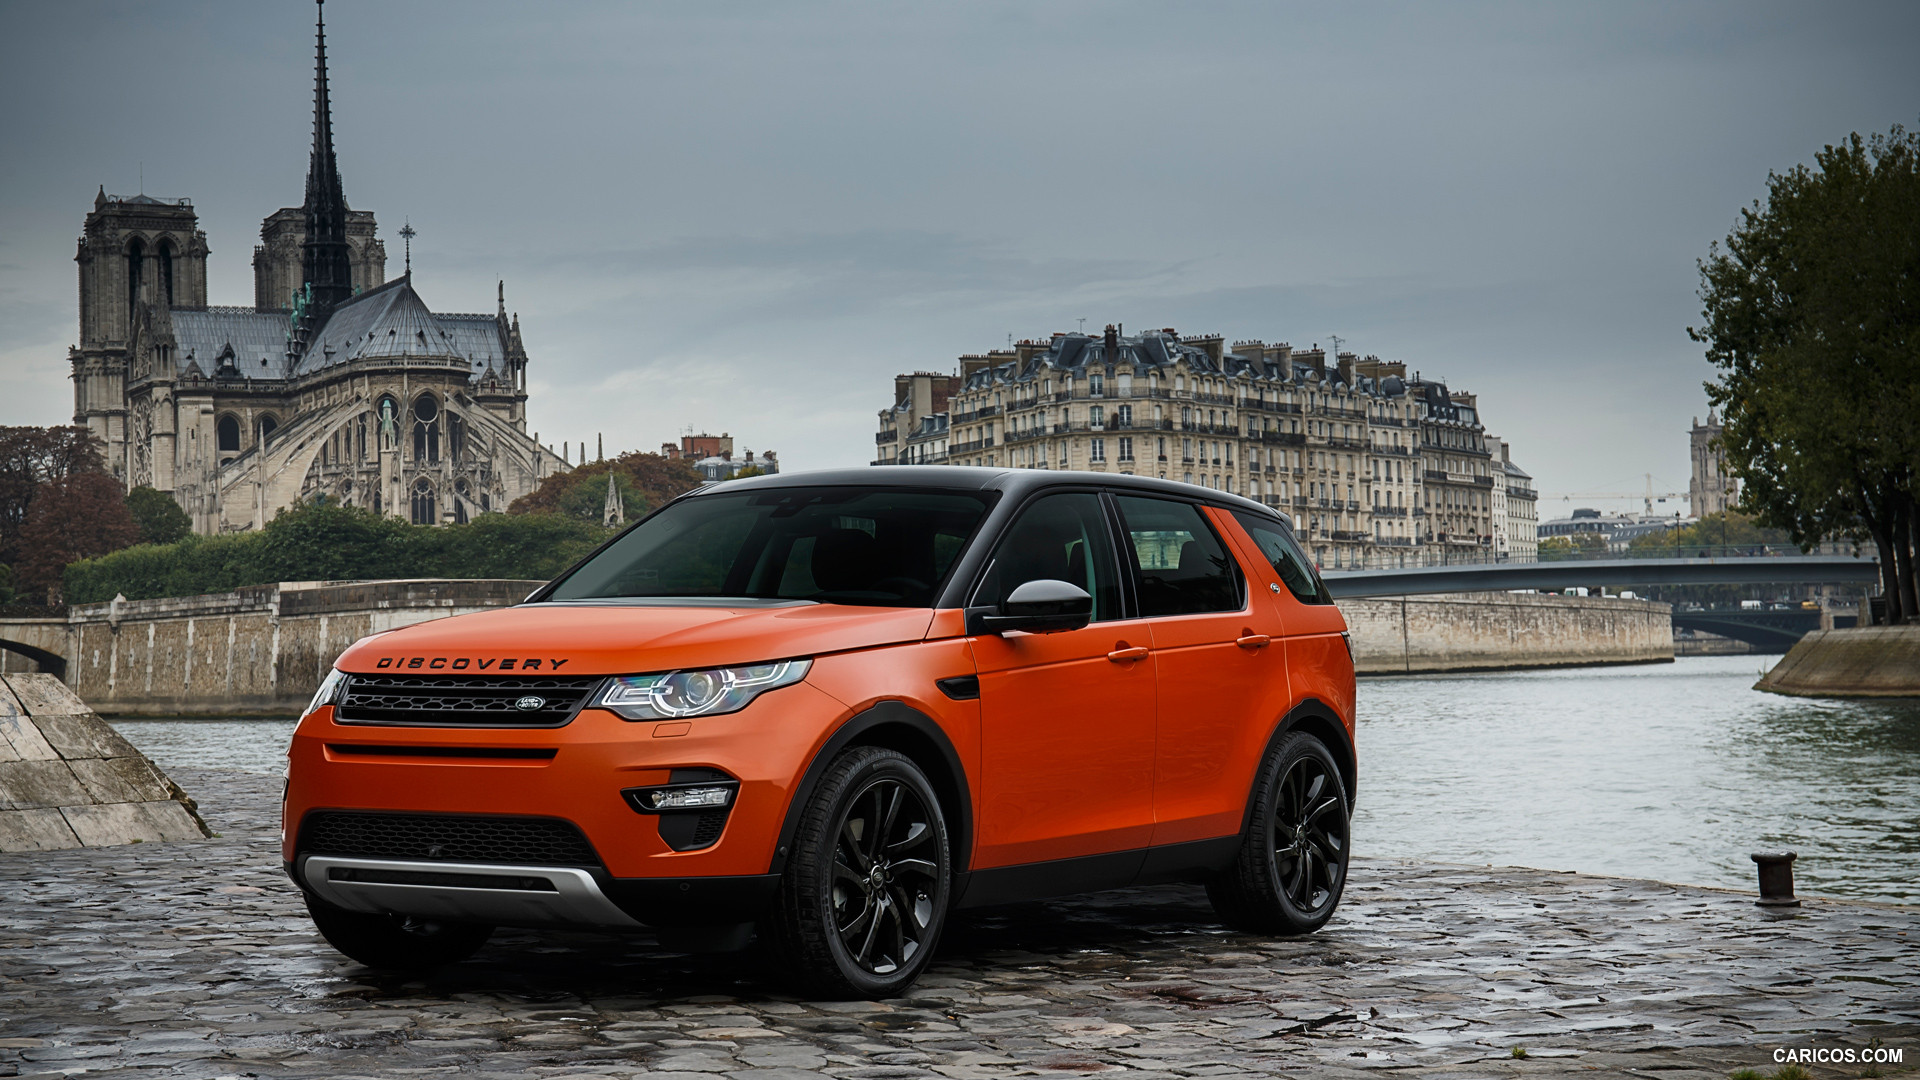 Land Rover Discovery Wallpaper Image Group